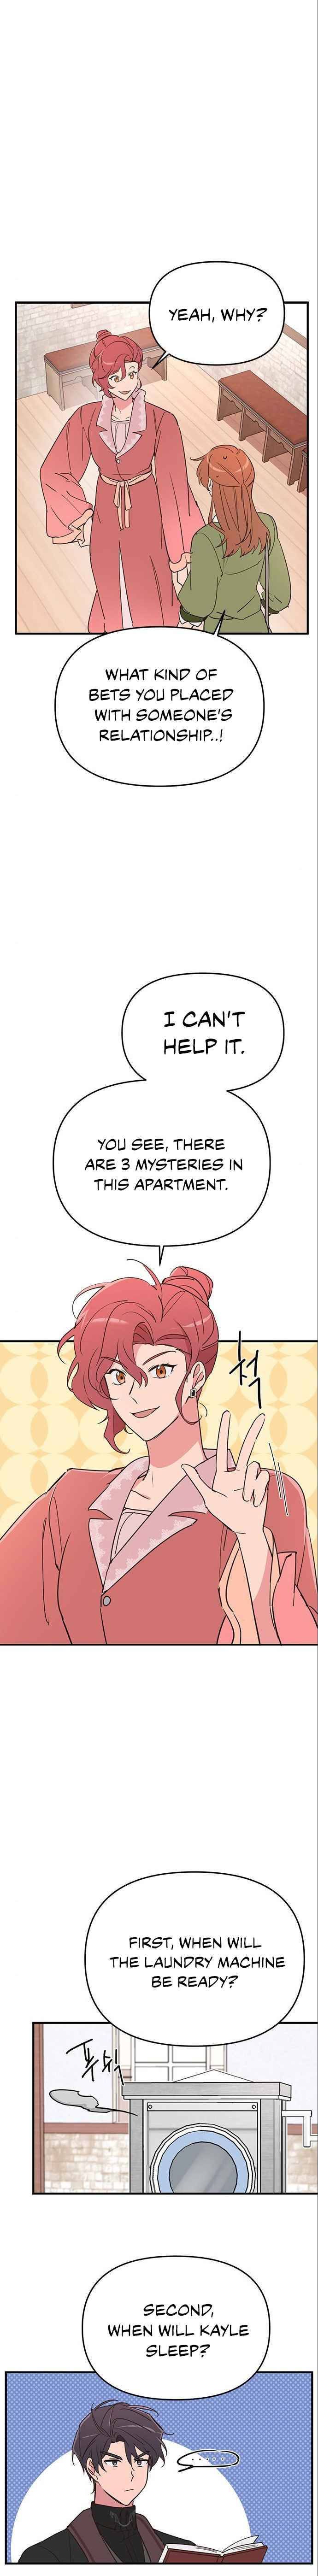 Single Wizard’s Dormitory Apartment Chapter 8 - Page 3